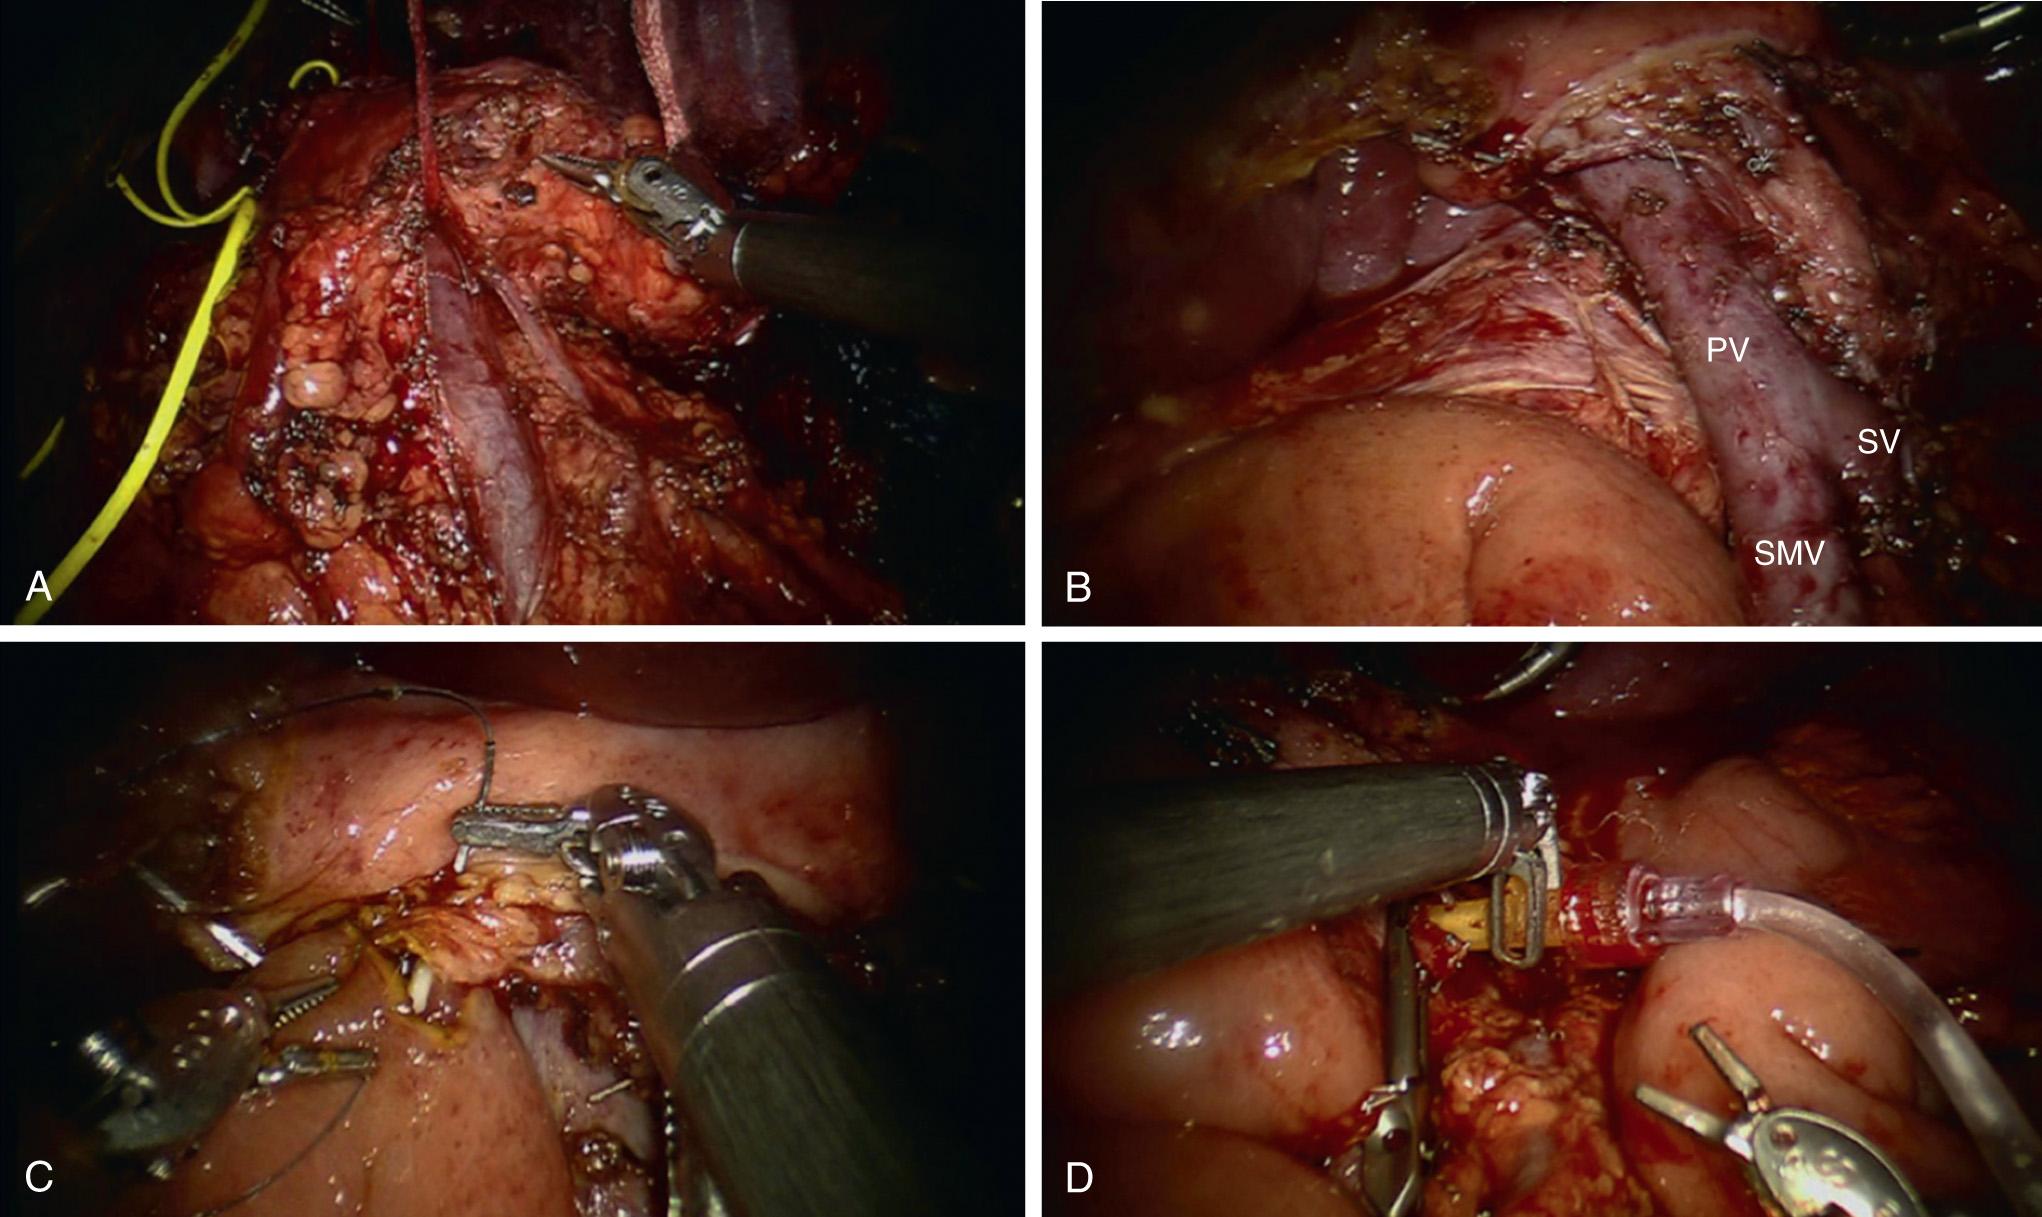 FIGURE 101.4, Robotic total pancreatectomy with auto islet transplantation—technique. (A) Pancreatic neck is freed from the superior mesenteric vein (SMV) , splenic vein (SV) , and portal vein (PV) . (B) Resection of entire pancreas from the retroperitoenum. (C) Creation of hepaticojejunostomy over a stent. (D) Angiocatheter introduced through the SV stump for islet cell infusion.